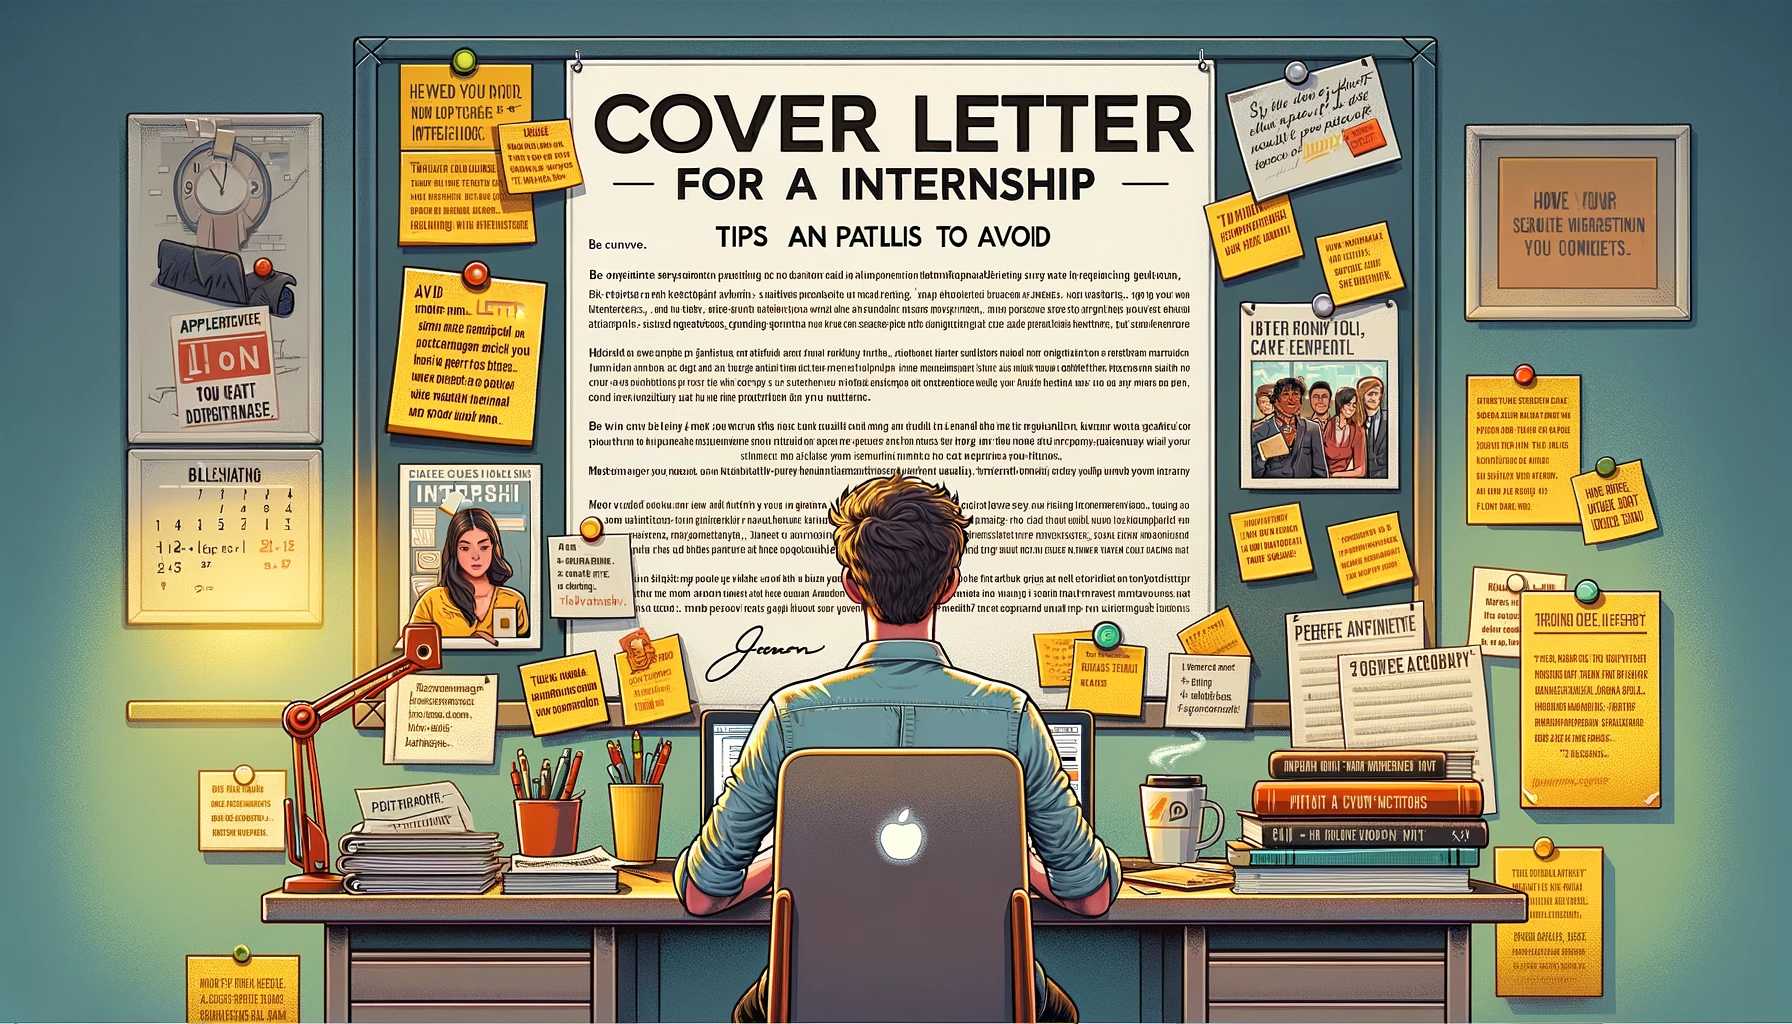 Perfect Cover Letter for an Internship: Tips and Pitfalls to Avoid